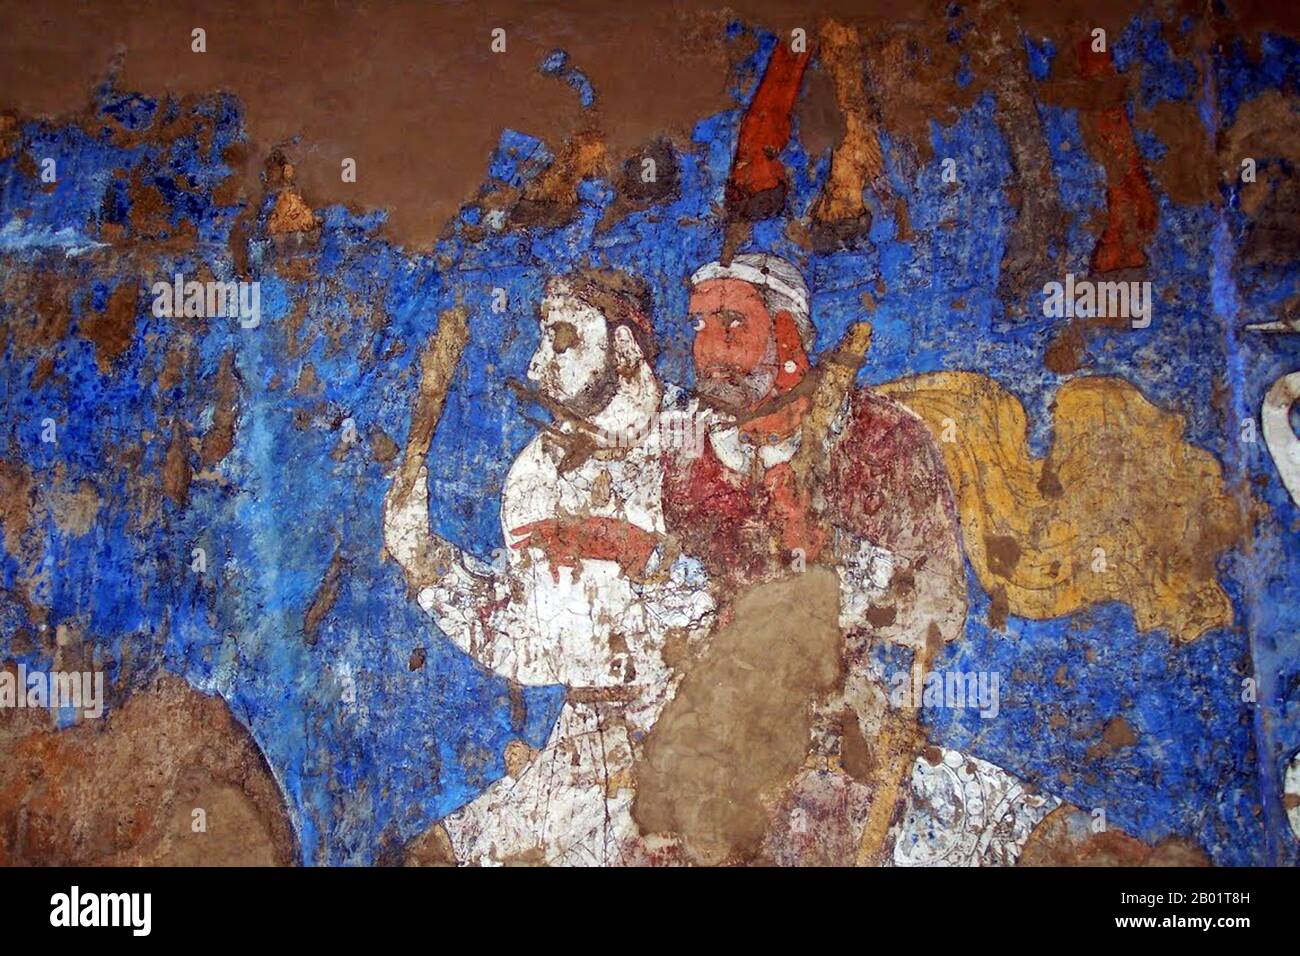 Uzbekistan: Riders. Detail from a section of the Afrasiab Murals, c. 850 CE.  The Afrasiab painting is a rare example of Sogdian art. It was discovered in 1965 when the local authorities decided on the construction of a road through the middle of Afrāsiāb mound, the old site of pre-Mongol Samarkand. It is now preserved in a special museum on the Afrāsiāb mound. It is the main painting we have of ancient Sogdian art.  The painting dates back to the middle of the 7th century CE. Stock Photo